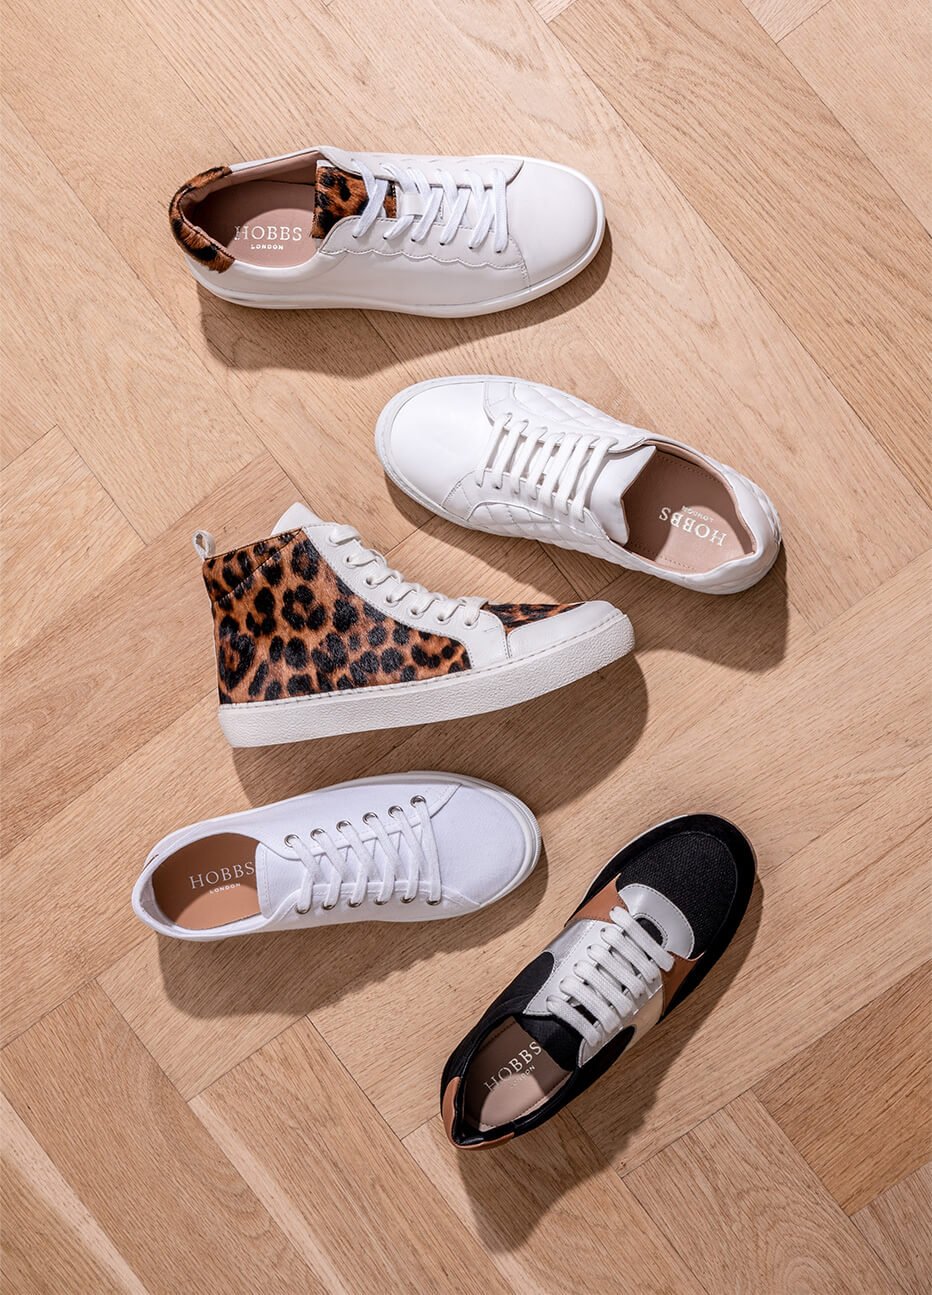 A selection of Hobbs trainers